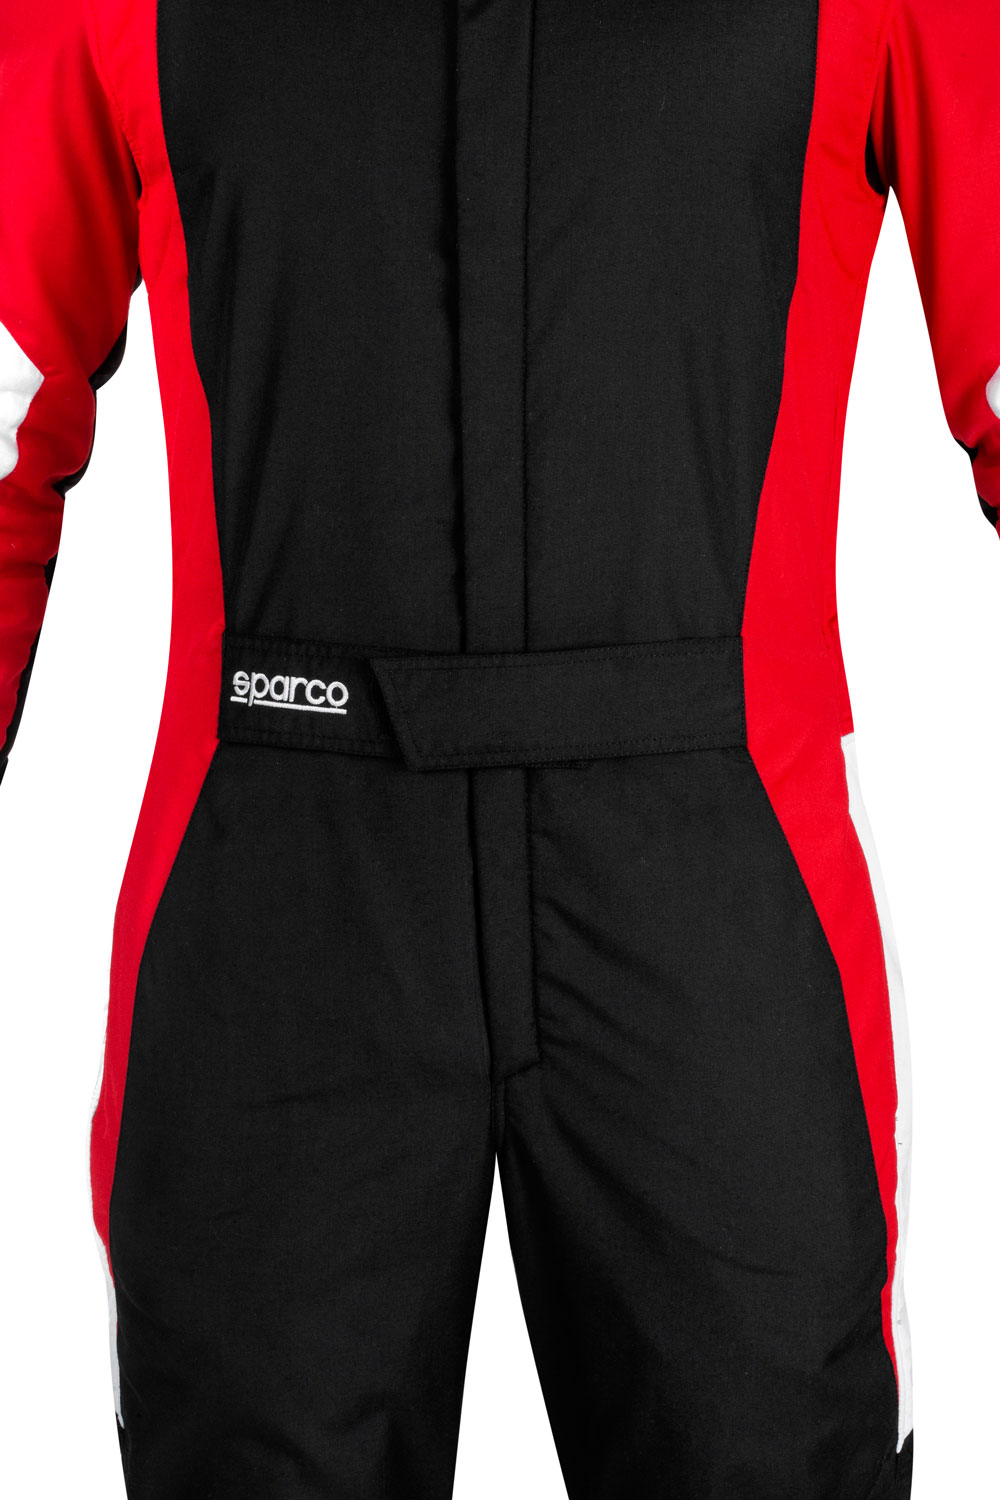 Sparco Rennoverall Competition Pro, schwarz/rot